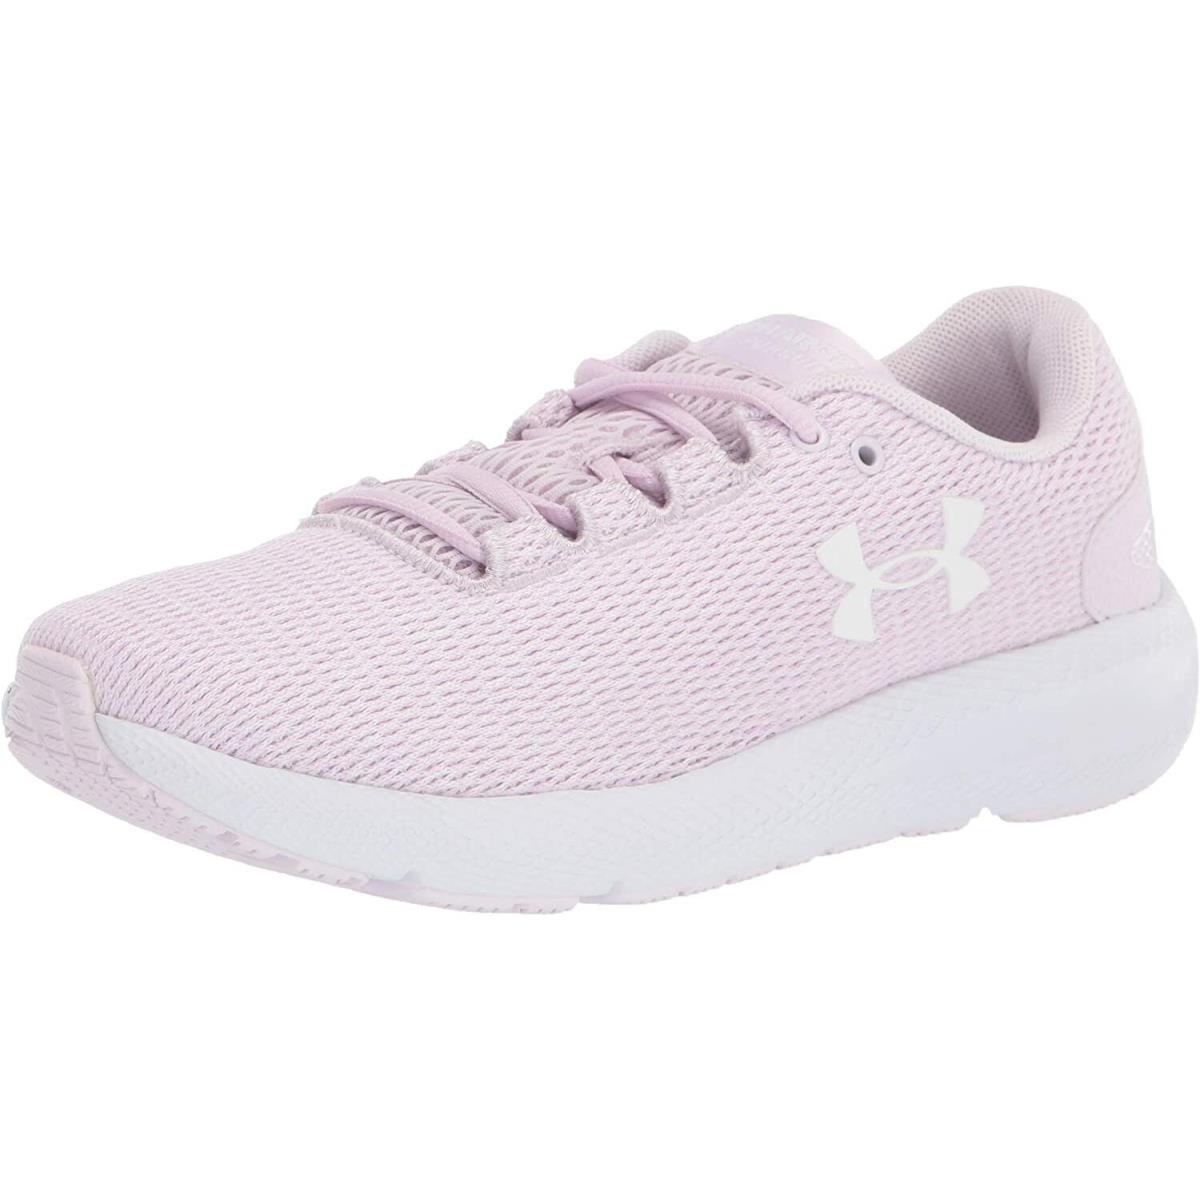 Under Armour Women`s Charged Pursuit 2 Twist Running Shoes